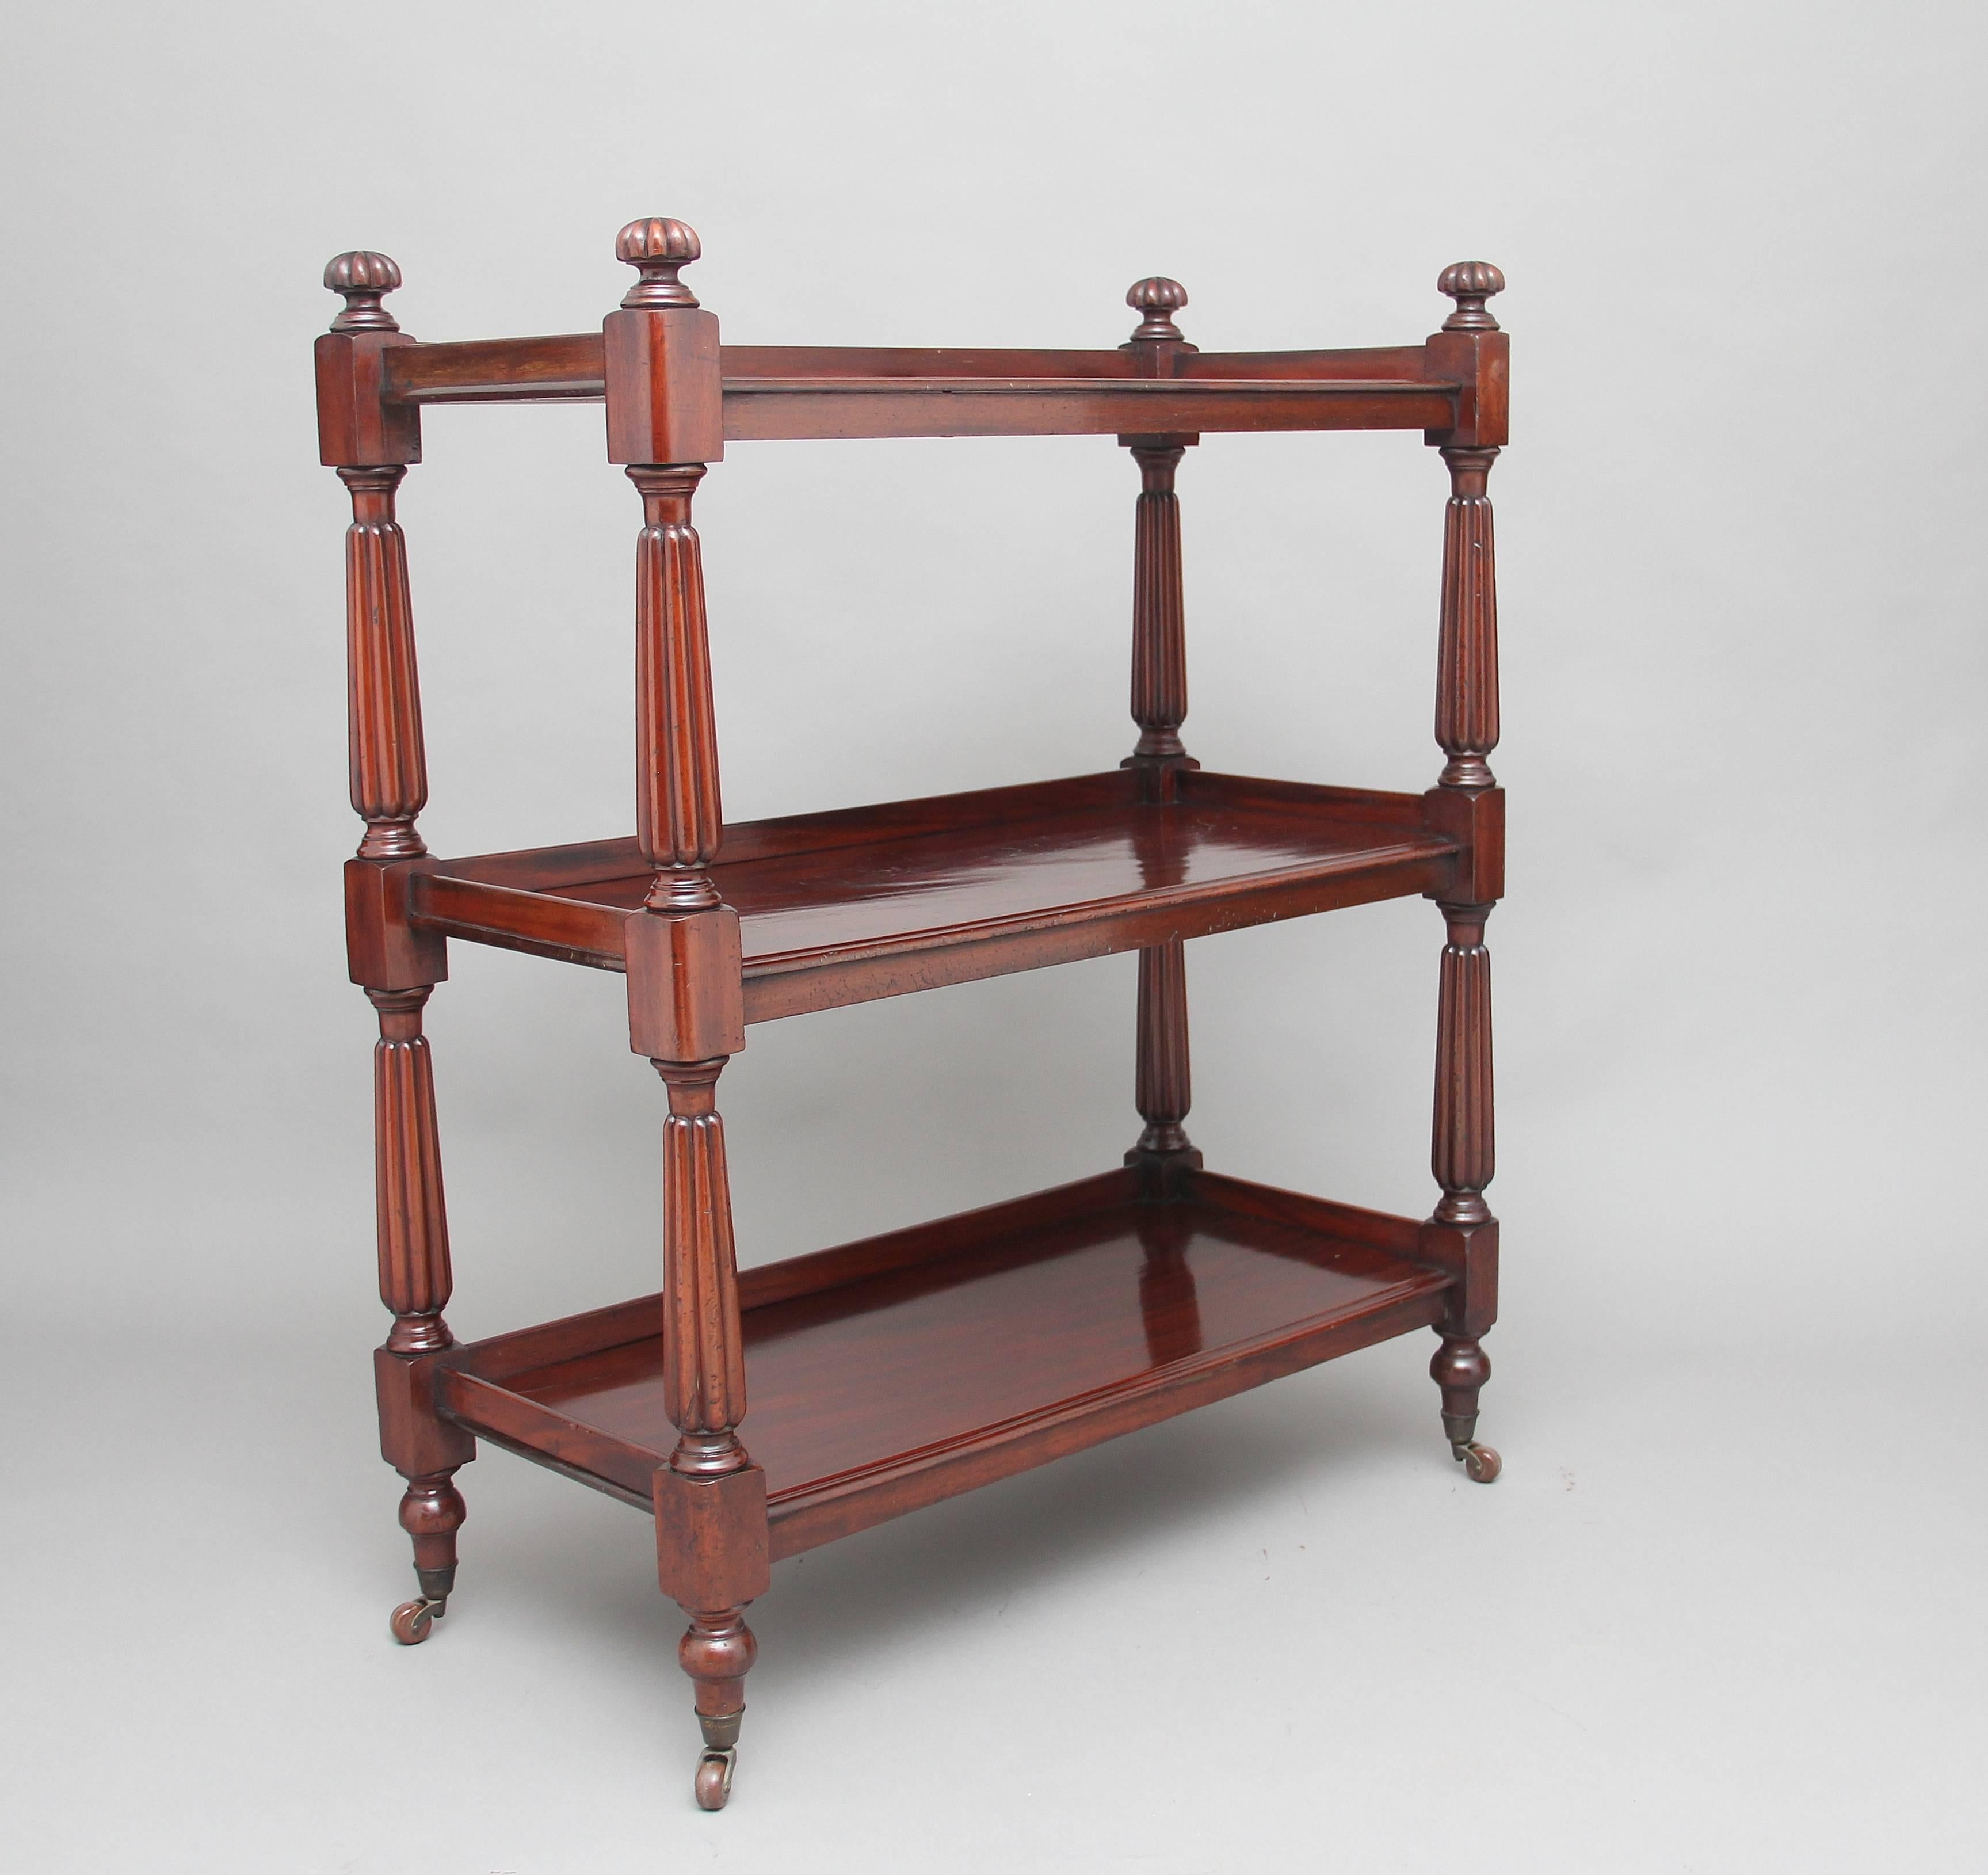 Early 19th century mahogany three tier dumbwaiter, each section having a gallery to the back and sides, wonderful fluted supports with the top shelf having carved turned and fluted decoration, standing on turned feet with brass caps and ceramic